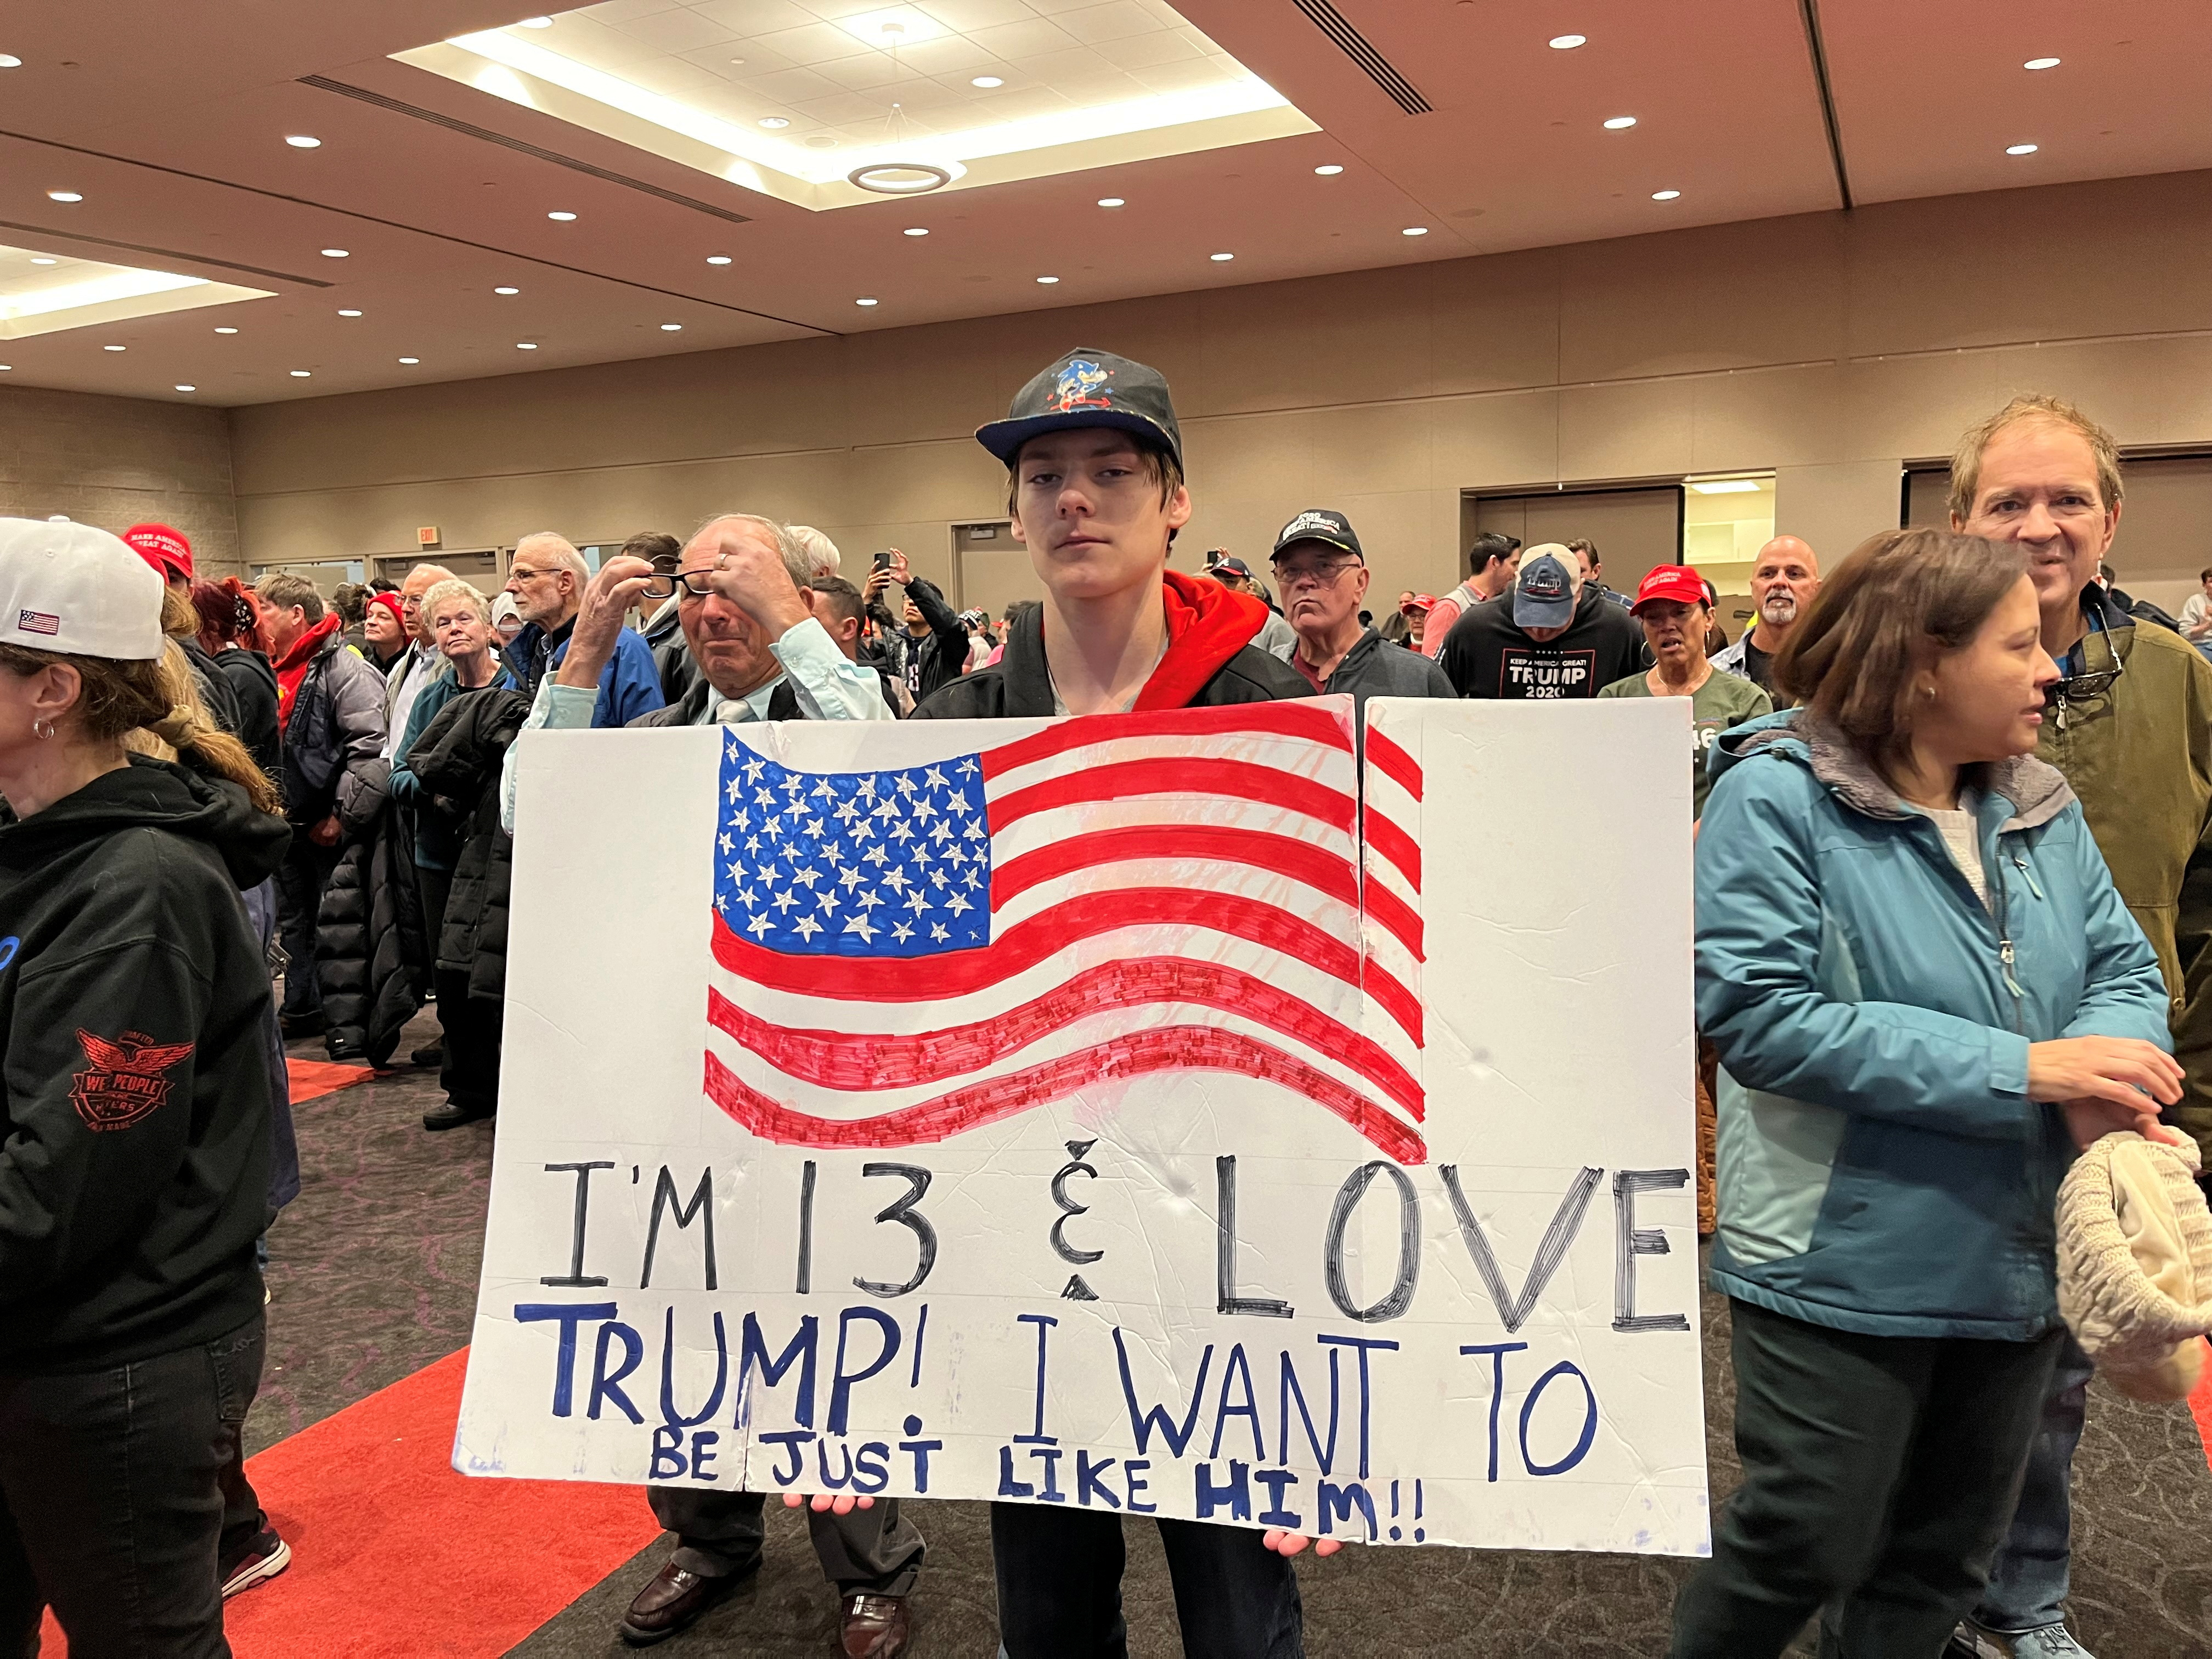 At Trump rally, young voters say high prices make them back him